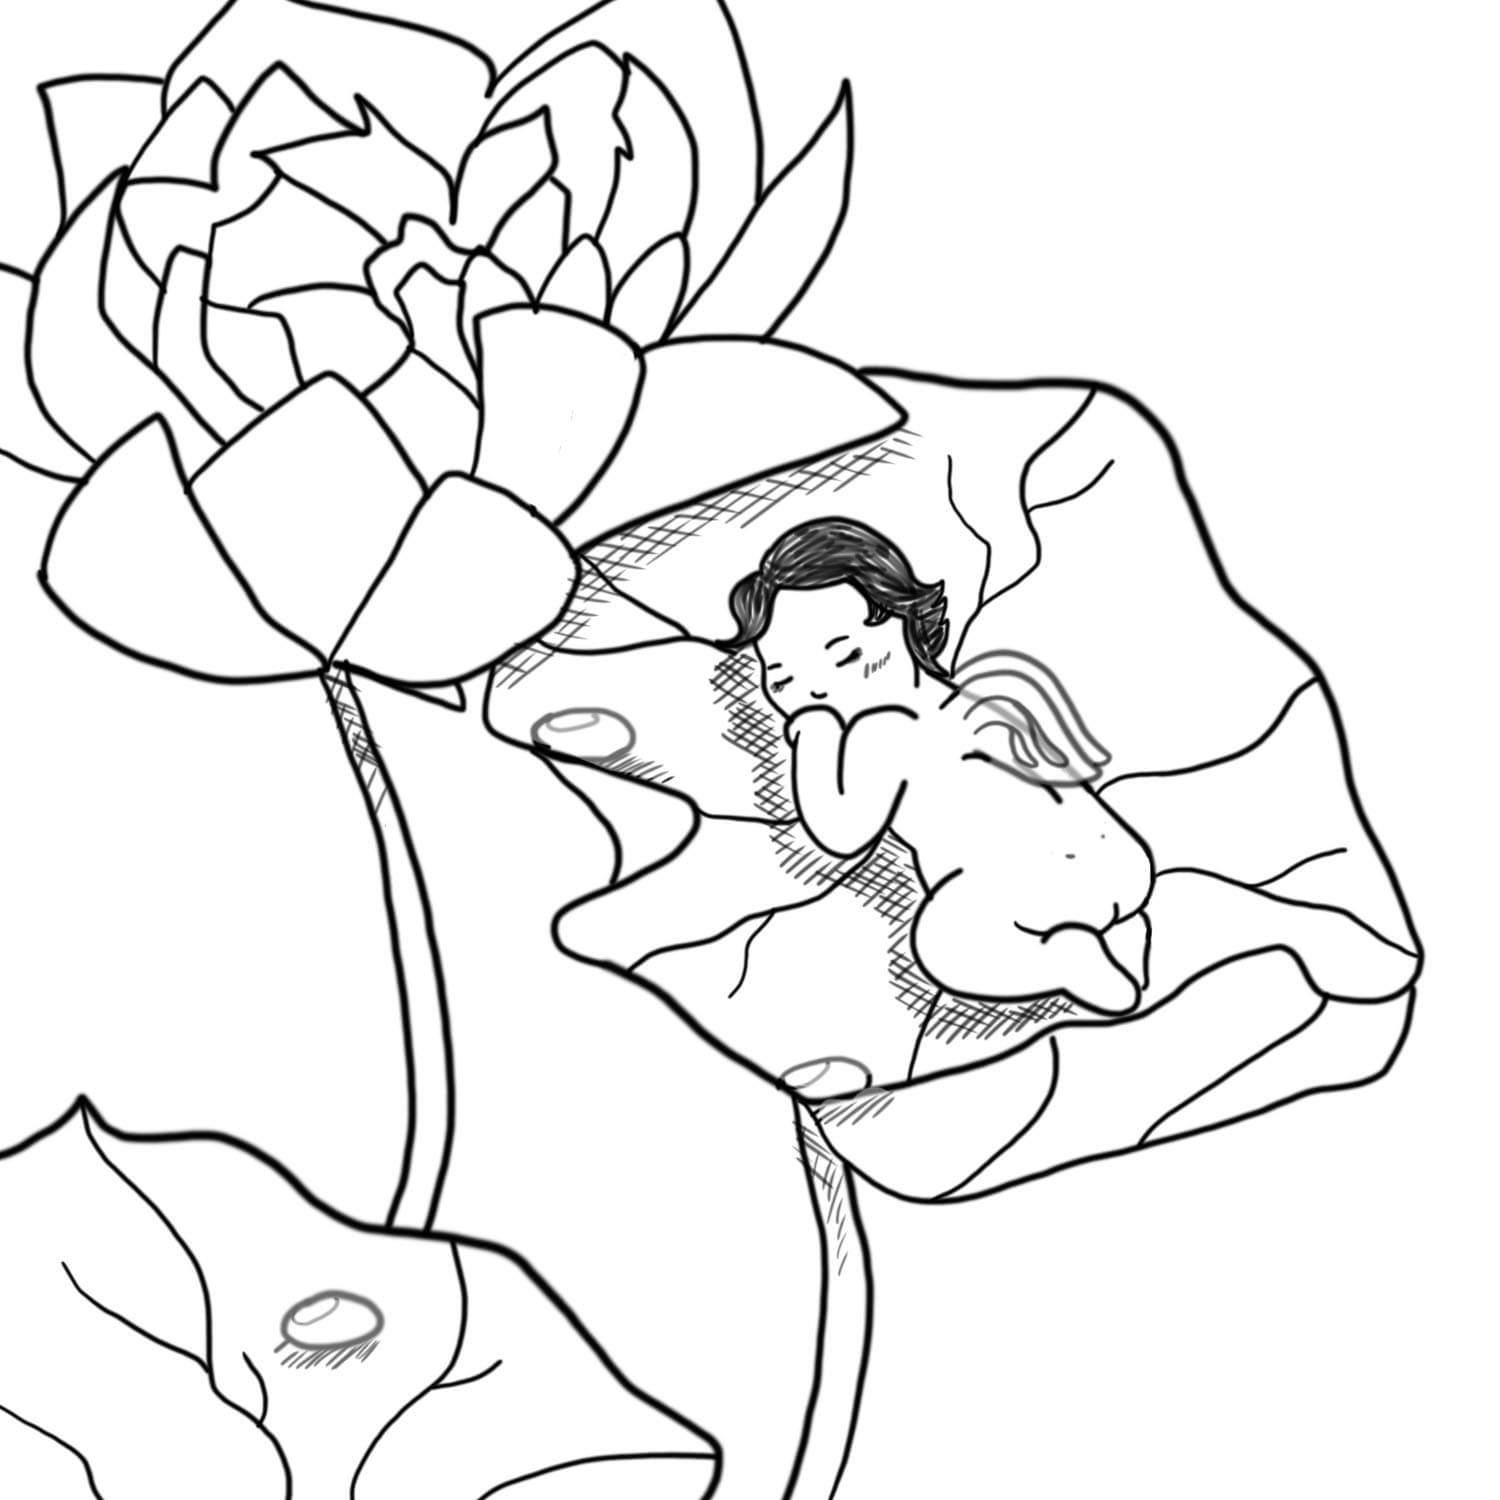 2. Tranquil Baby faerie is brand new and resting among the lotus flowers.